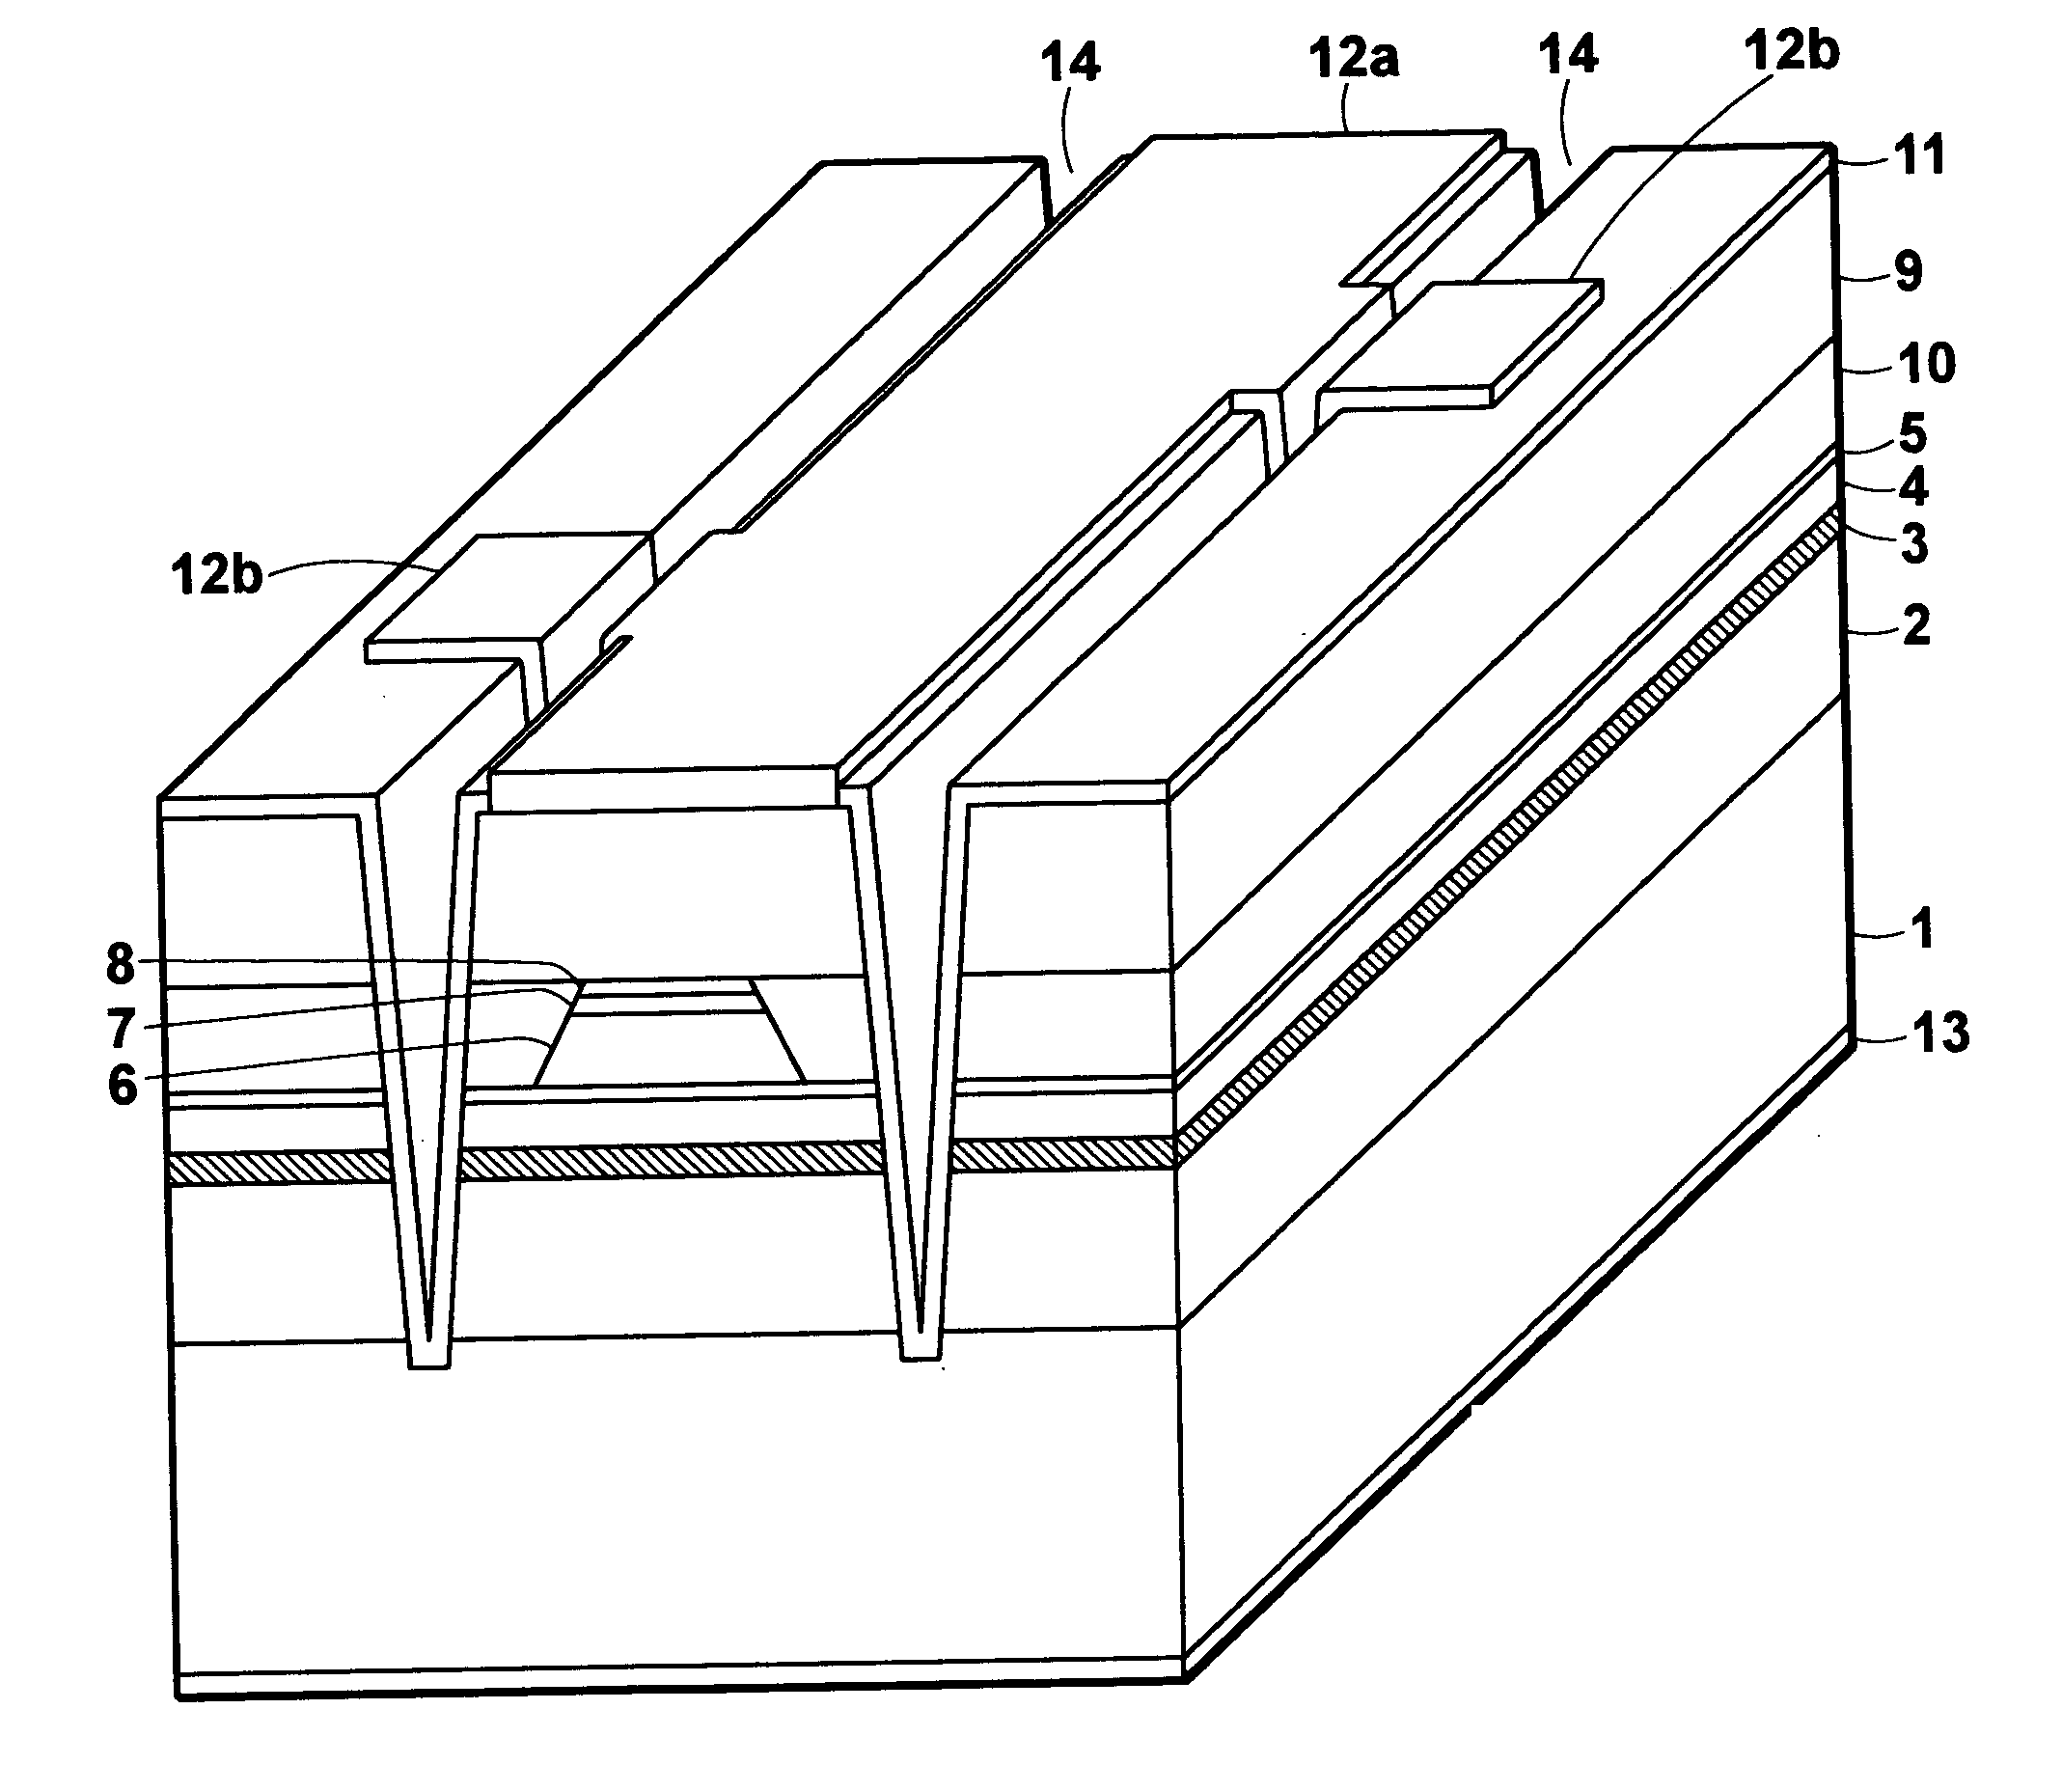 Semiconductor laser element having tensile-strained quantum-well active layer